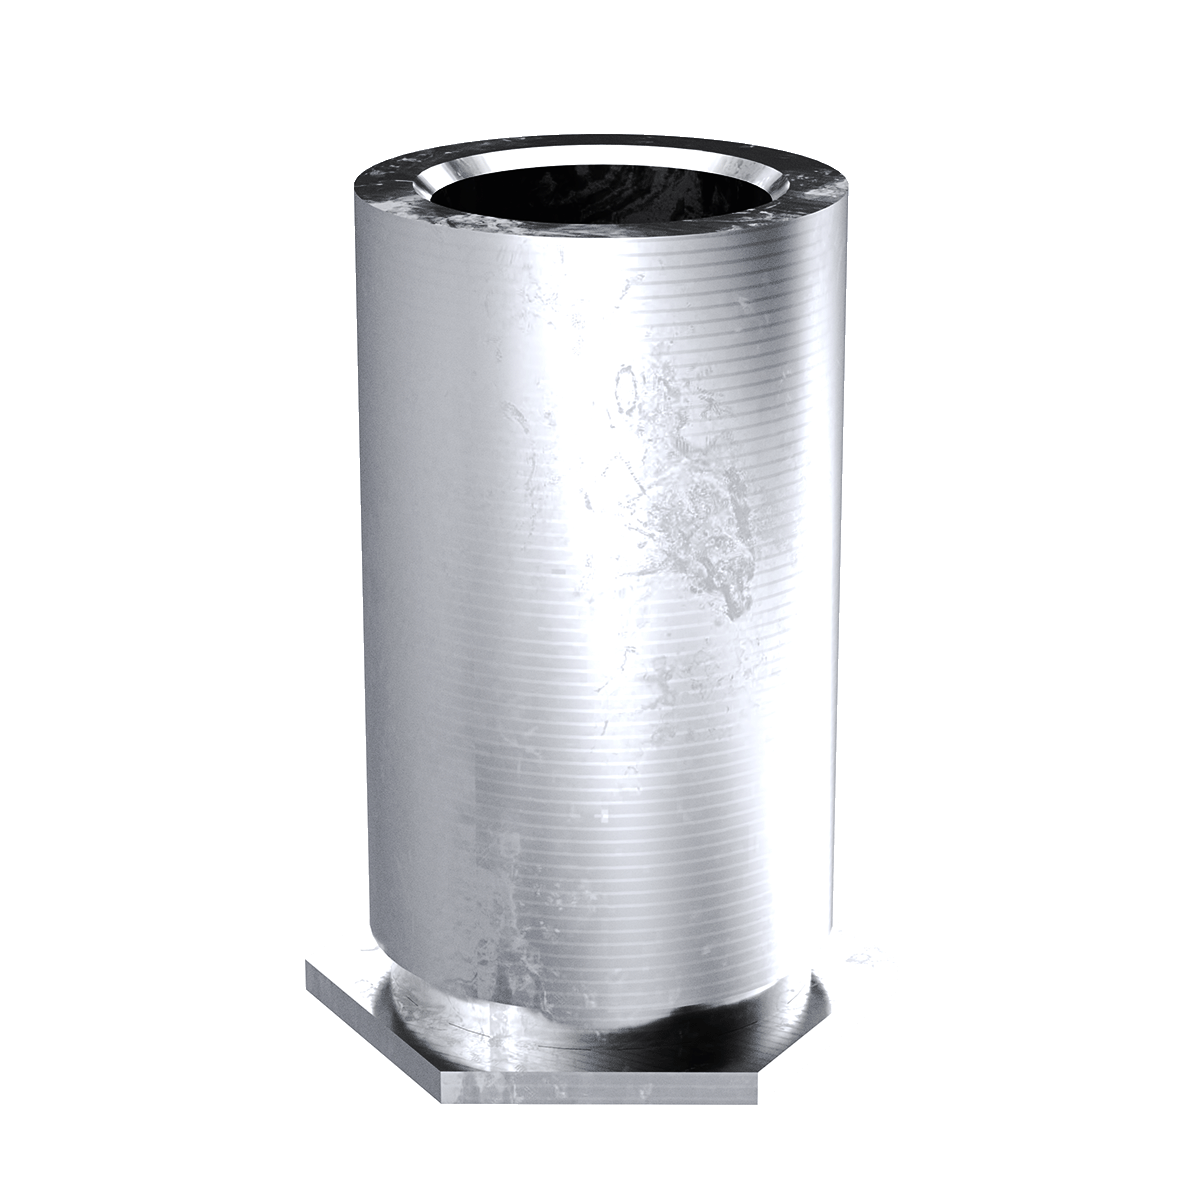 Self-Clinching Standoff, Through Unthreaded, 300 Series Stainless Steel, Passivated, 0.116 x 0.625, 100 Pack